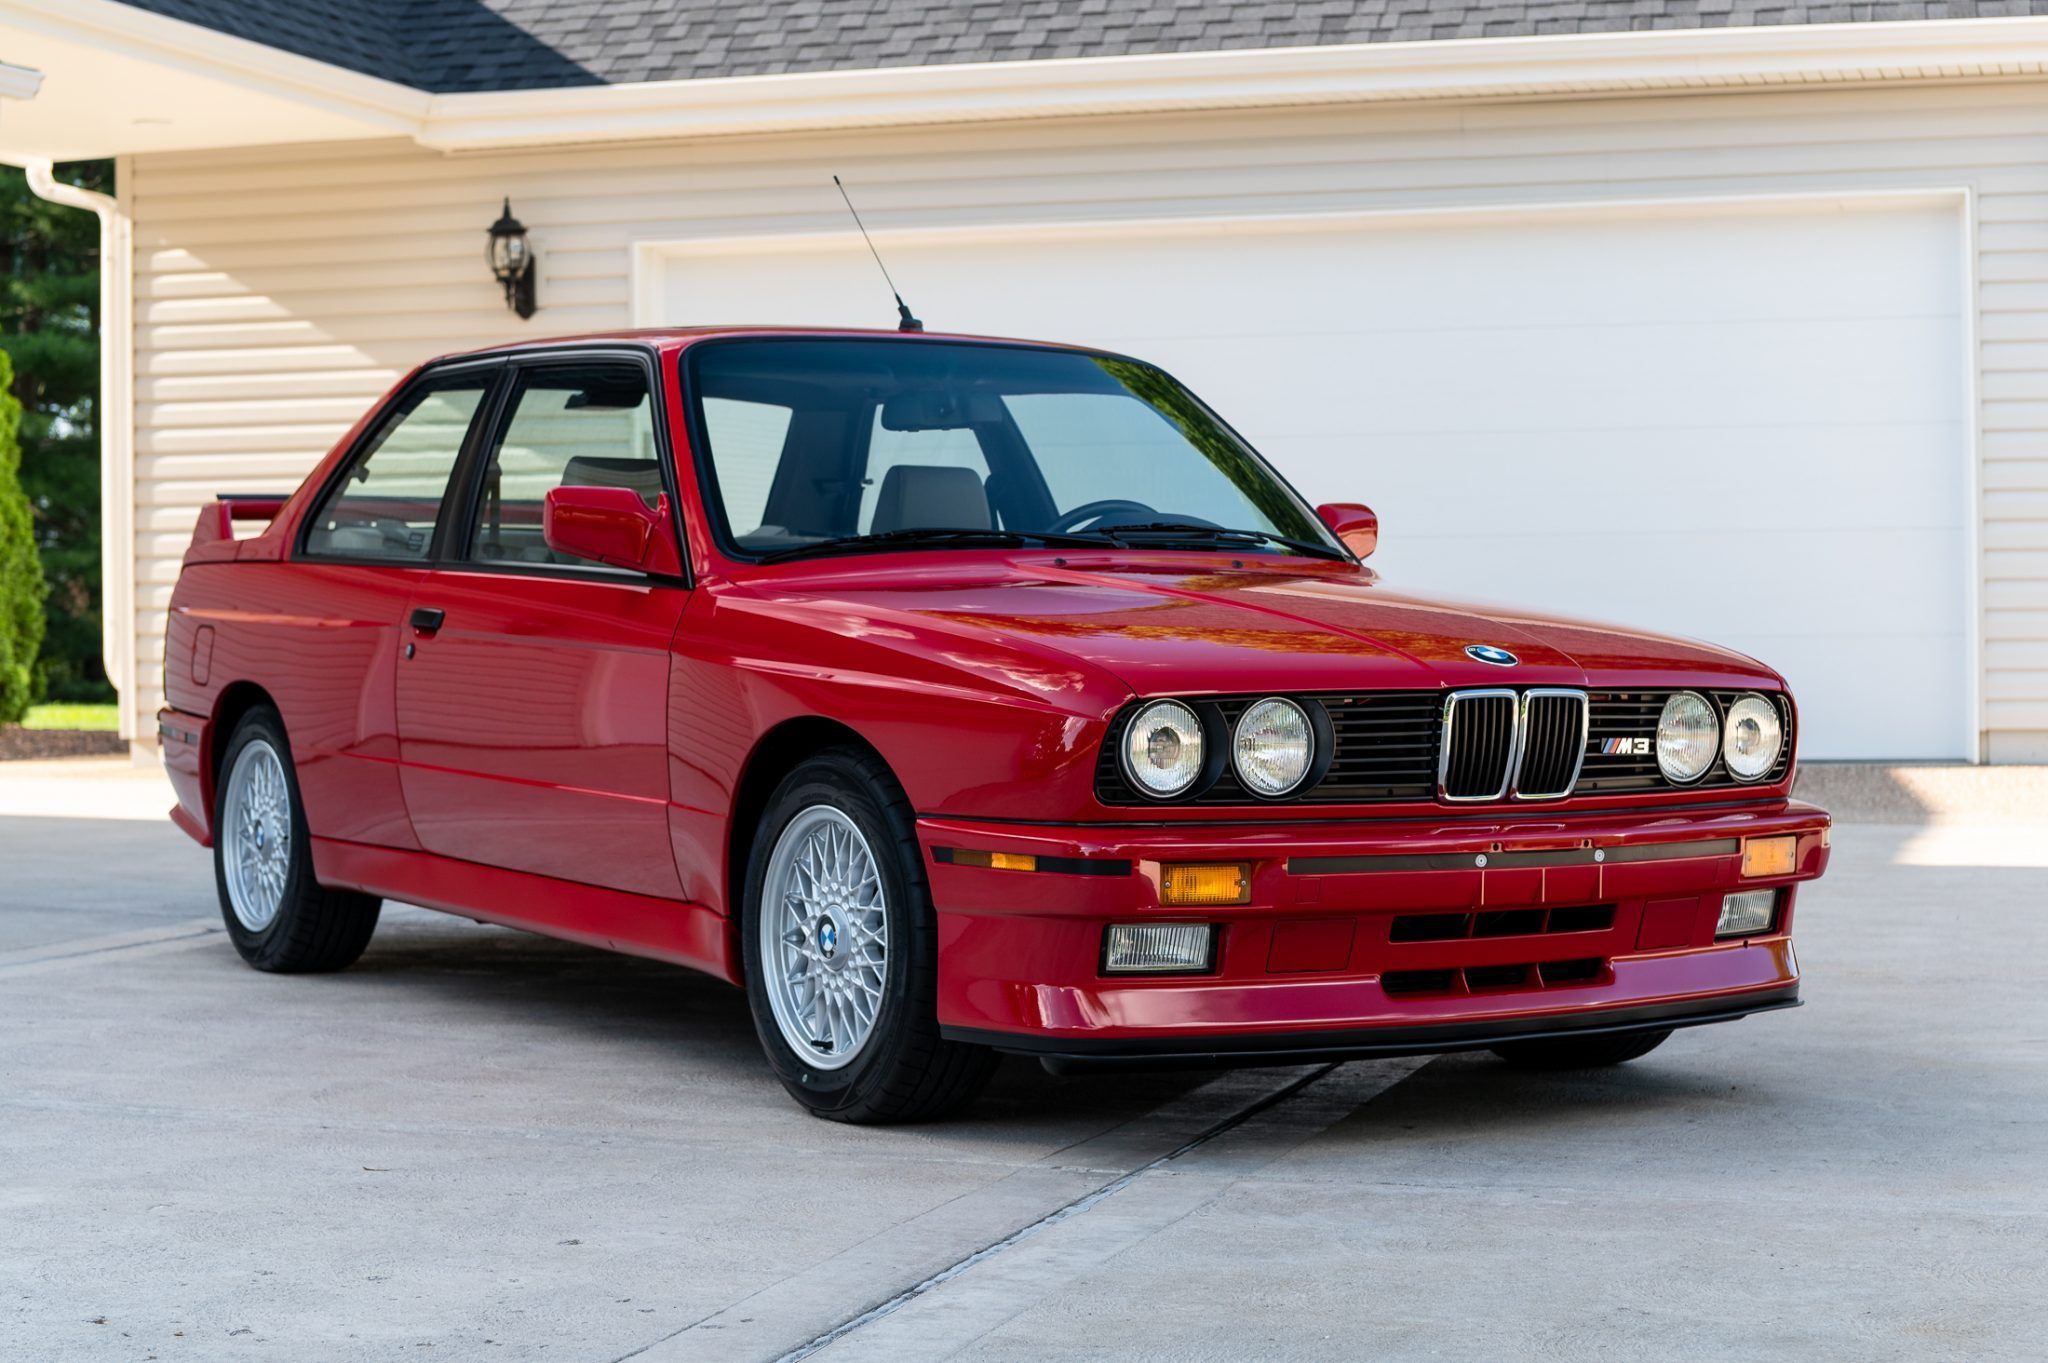 Top 5 BMW Cars That Shaped Automotive Excellence